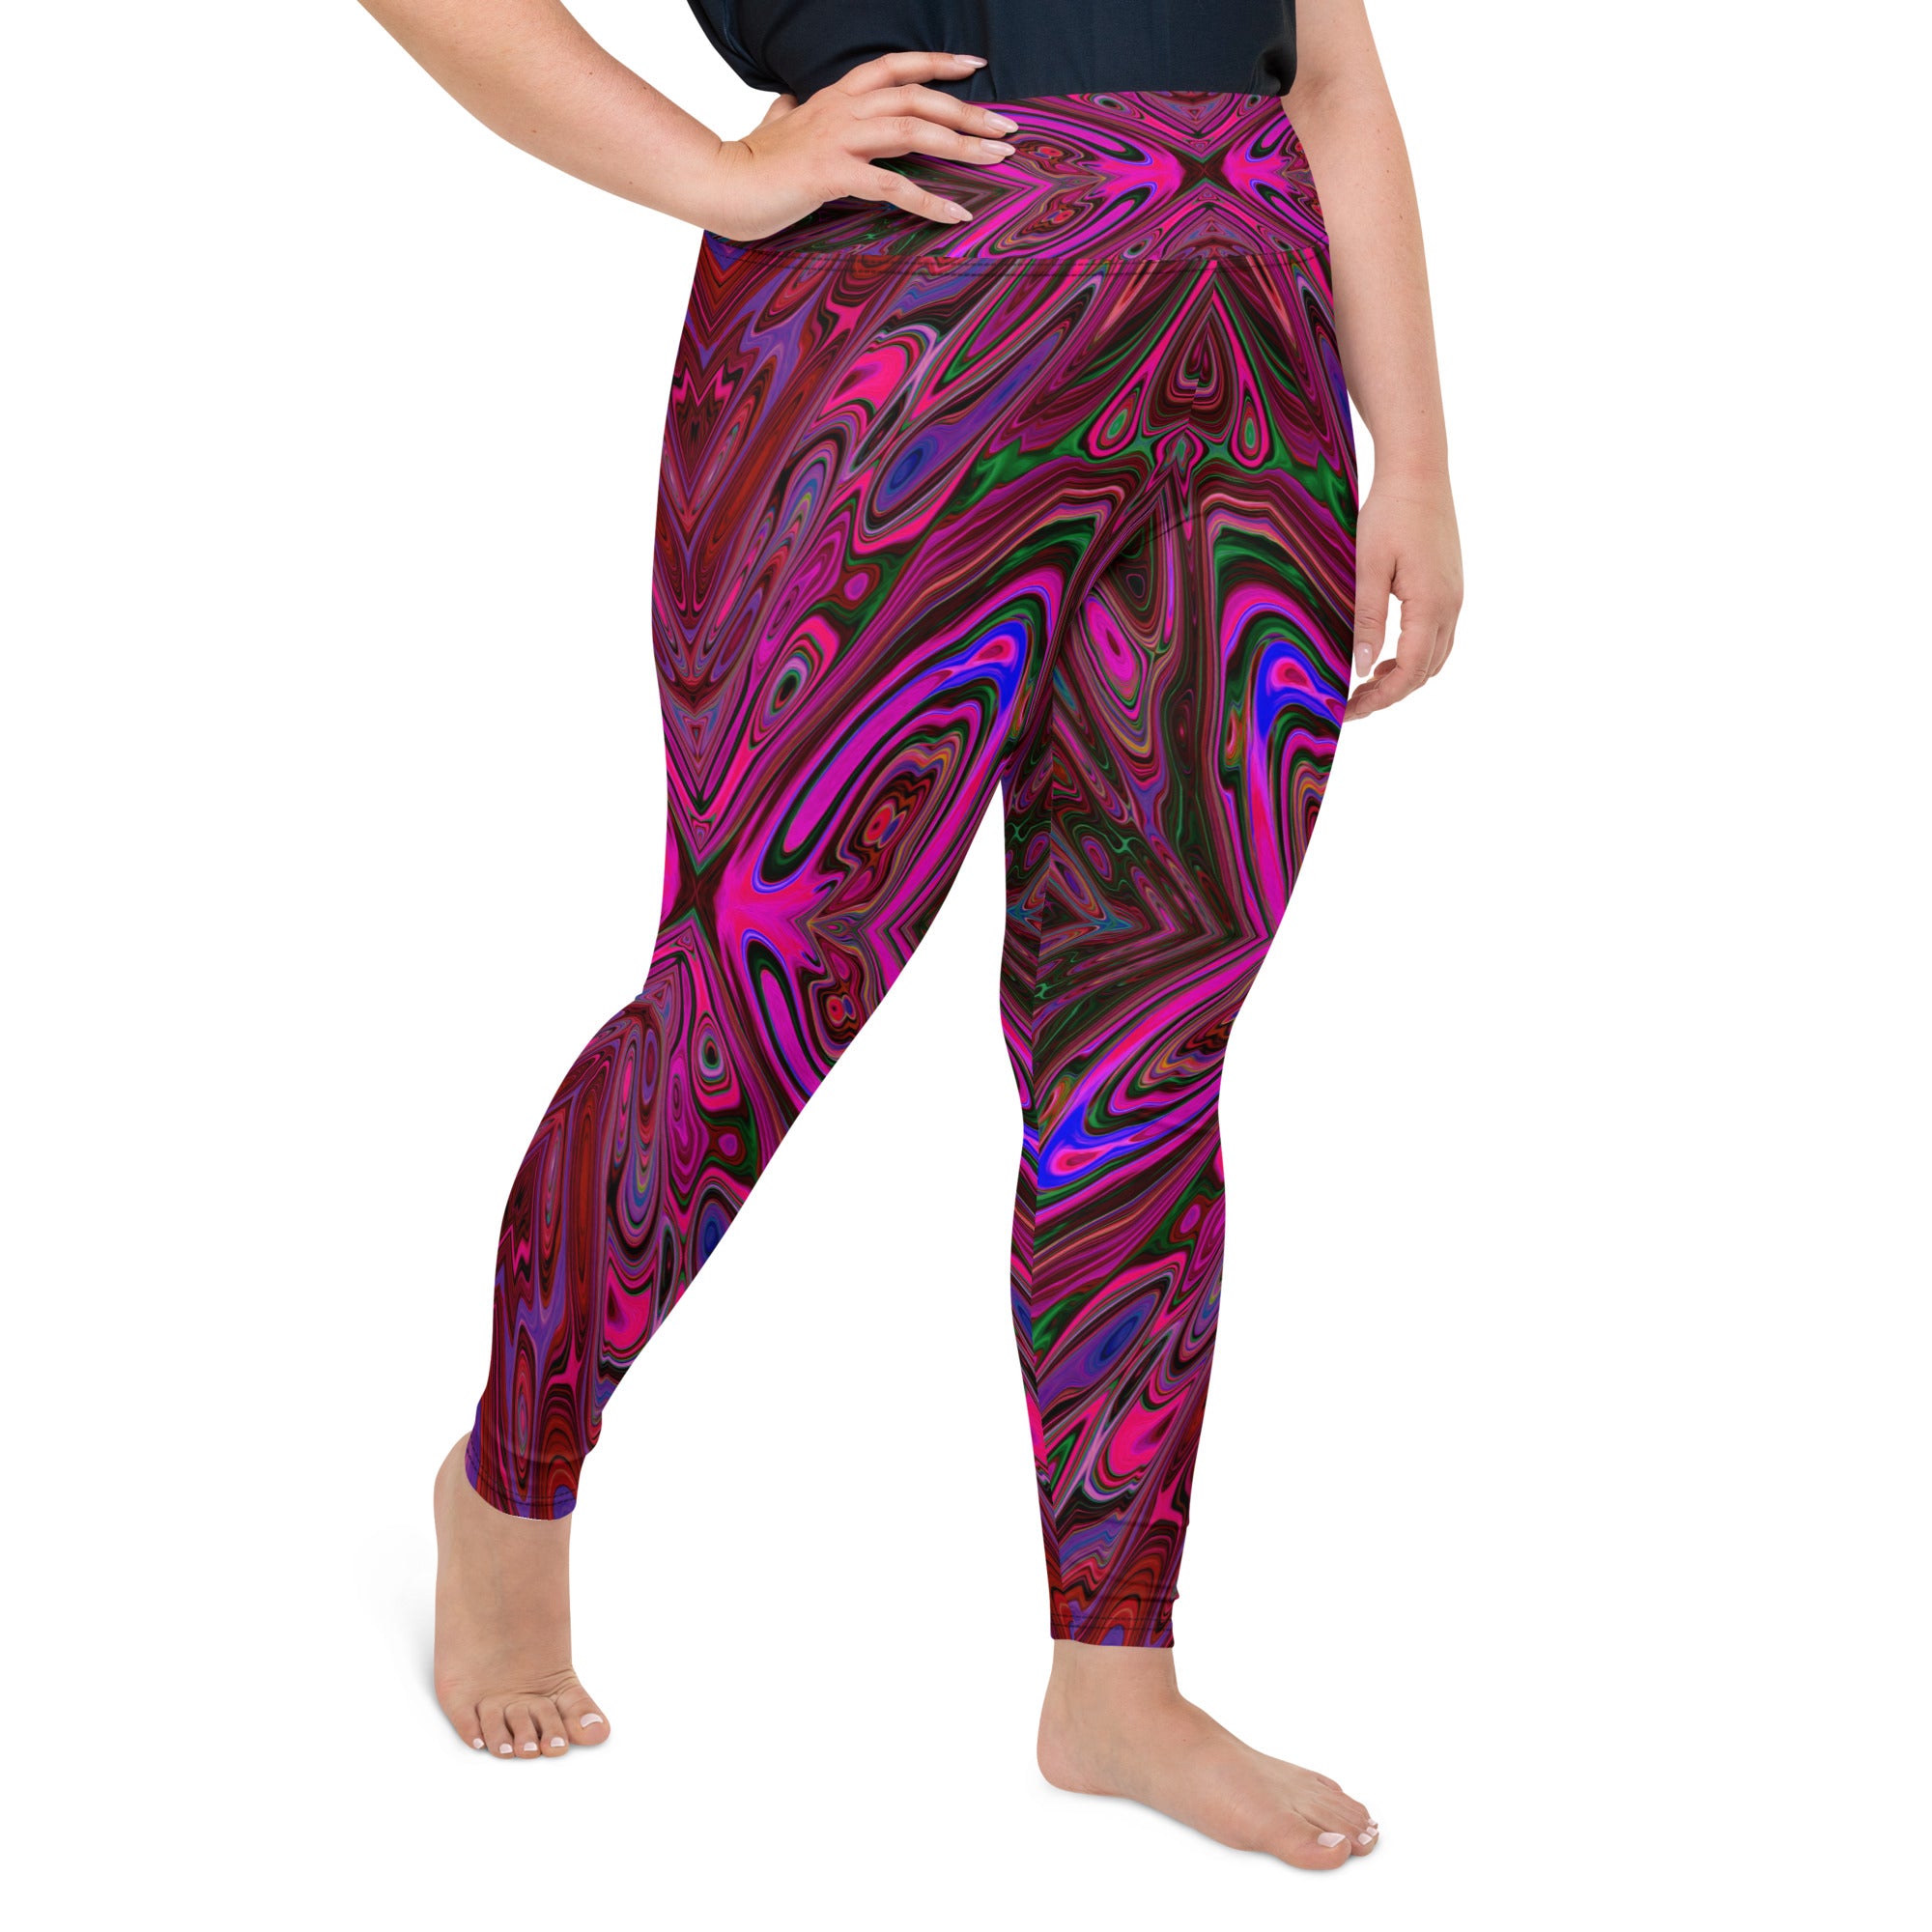 Plus Size Leggings, Trippy Hot Pink, Red and Blue Abstract Butterfly